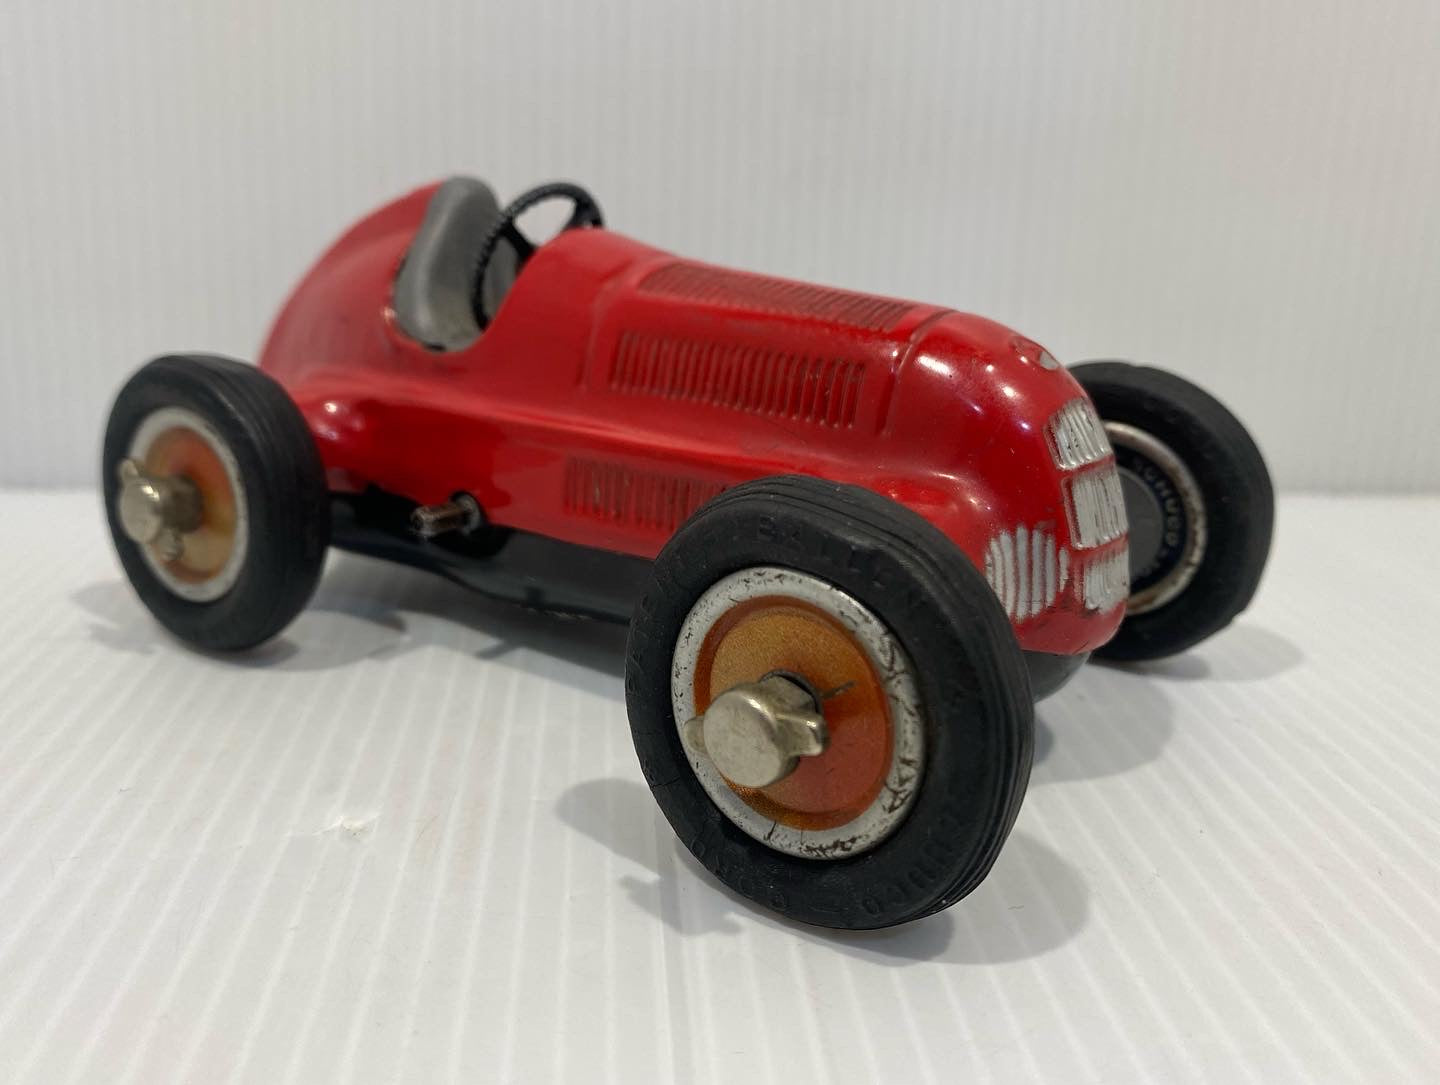 Original 1950s Schuco studio Racer 1050 Car Tin Plate Wind Up . Made in Germany US zone.